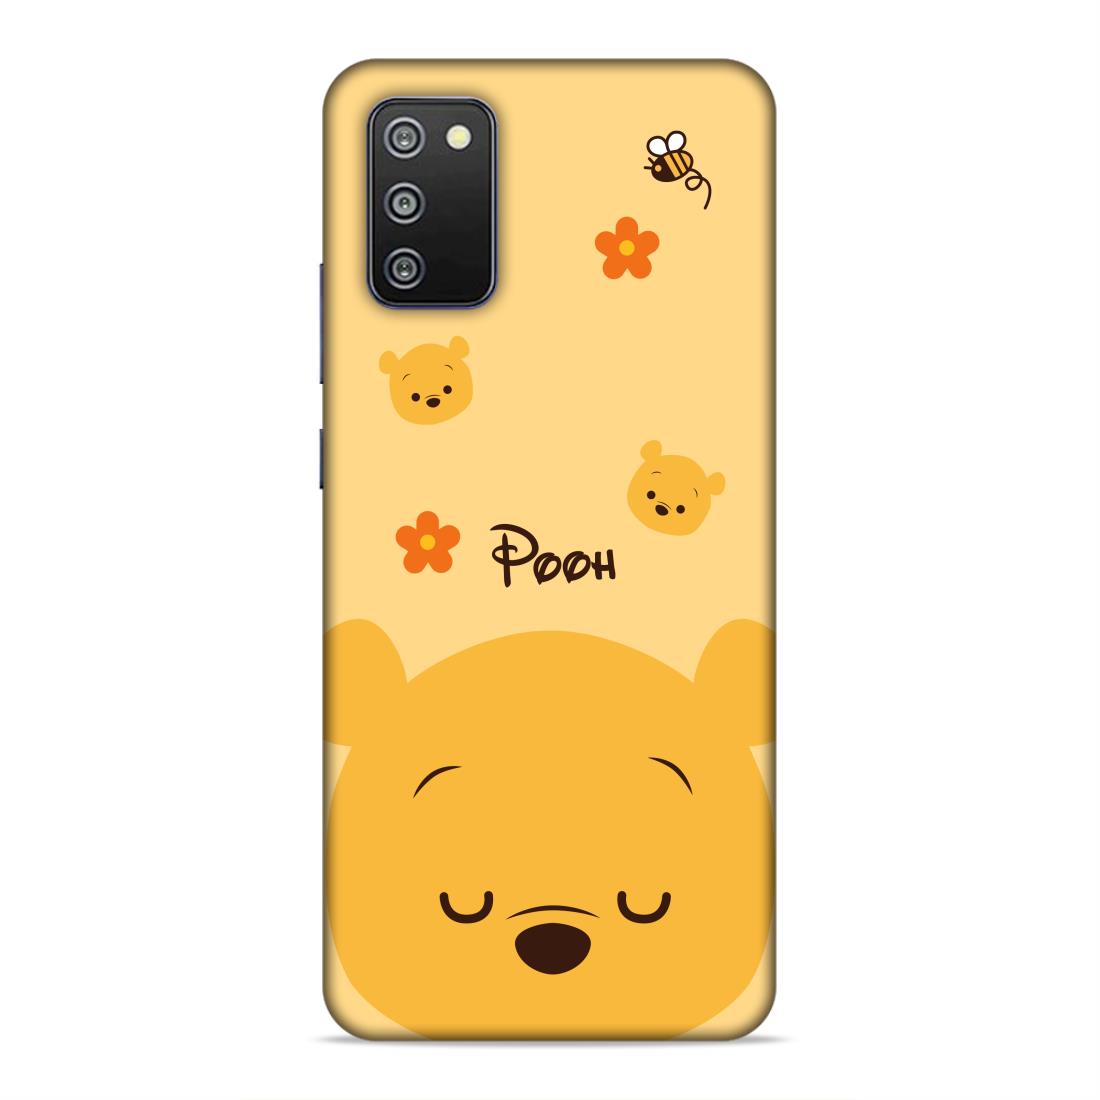 Pooh Cartton Hard Back Case For Samsung Galaxy A03s / F02s / M02s